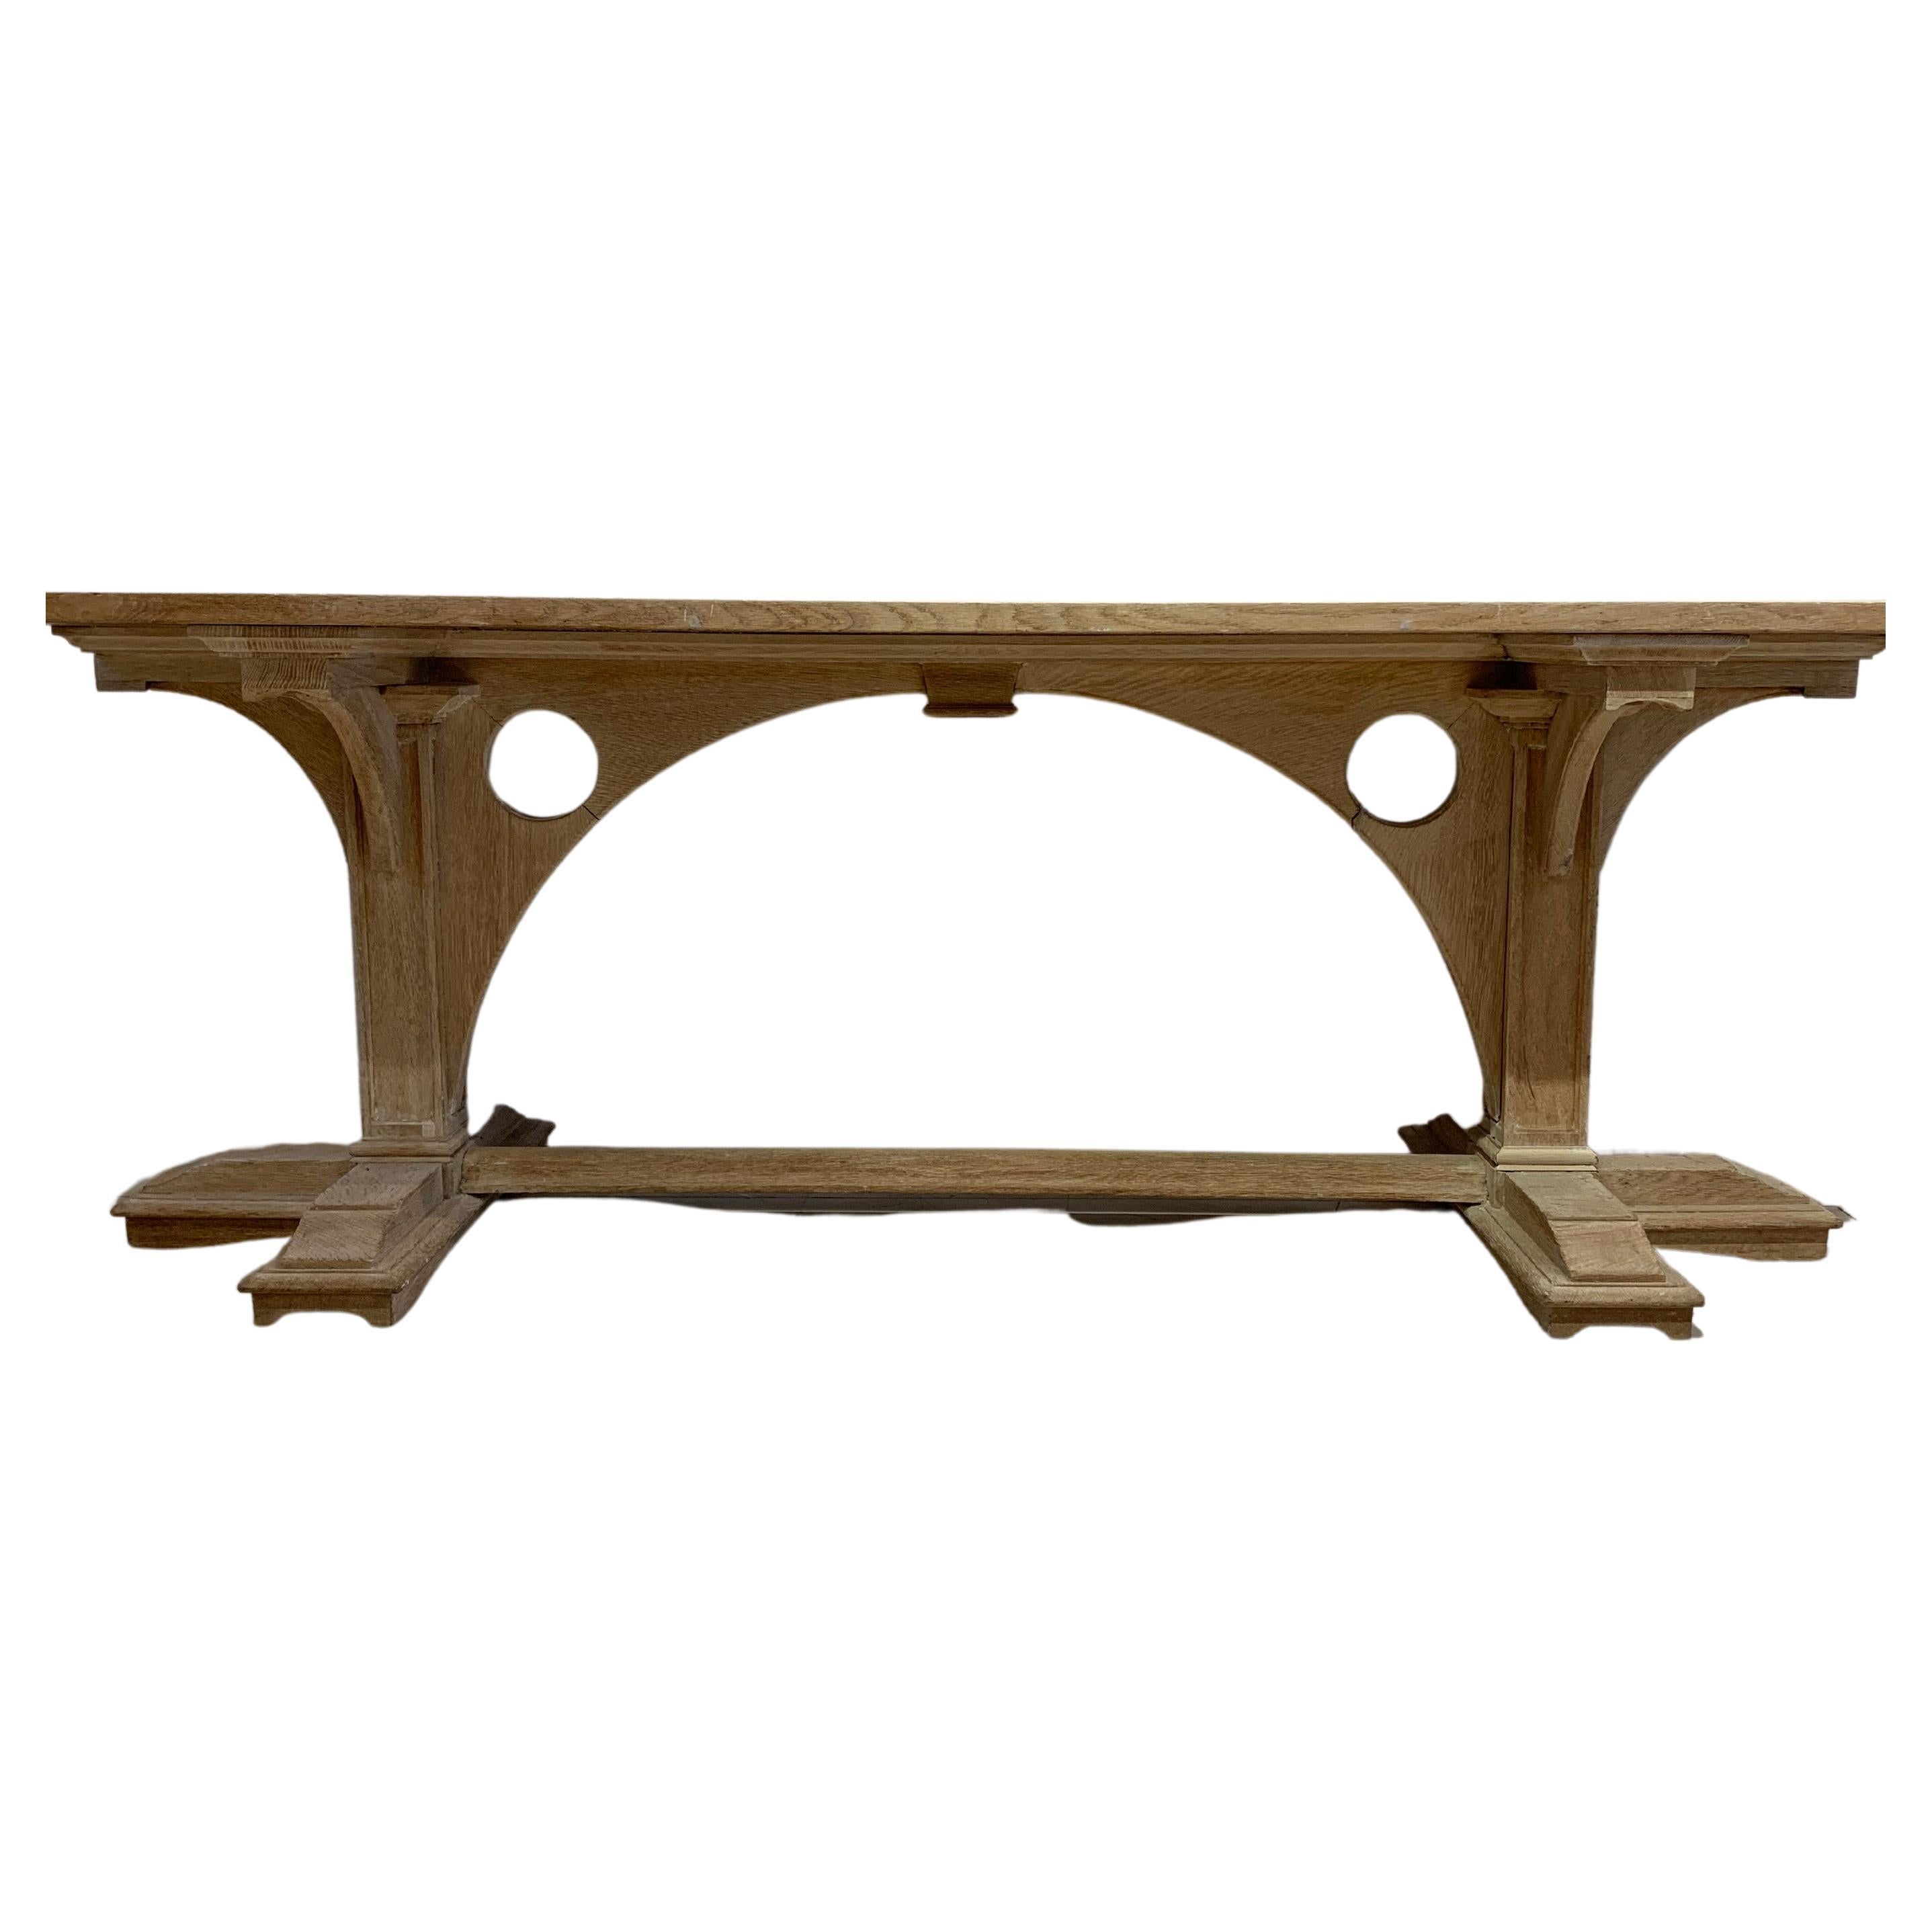 1920s French Bleached Oak Refectory Dining Table with a Decorative Gothic Base